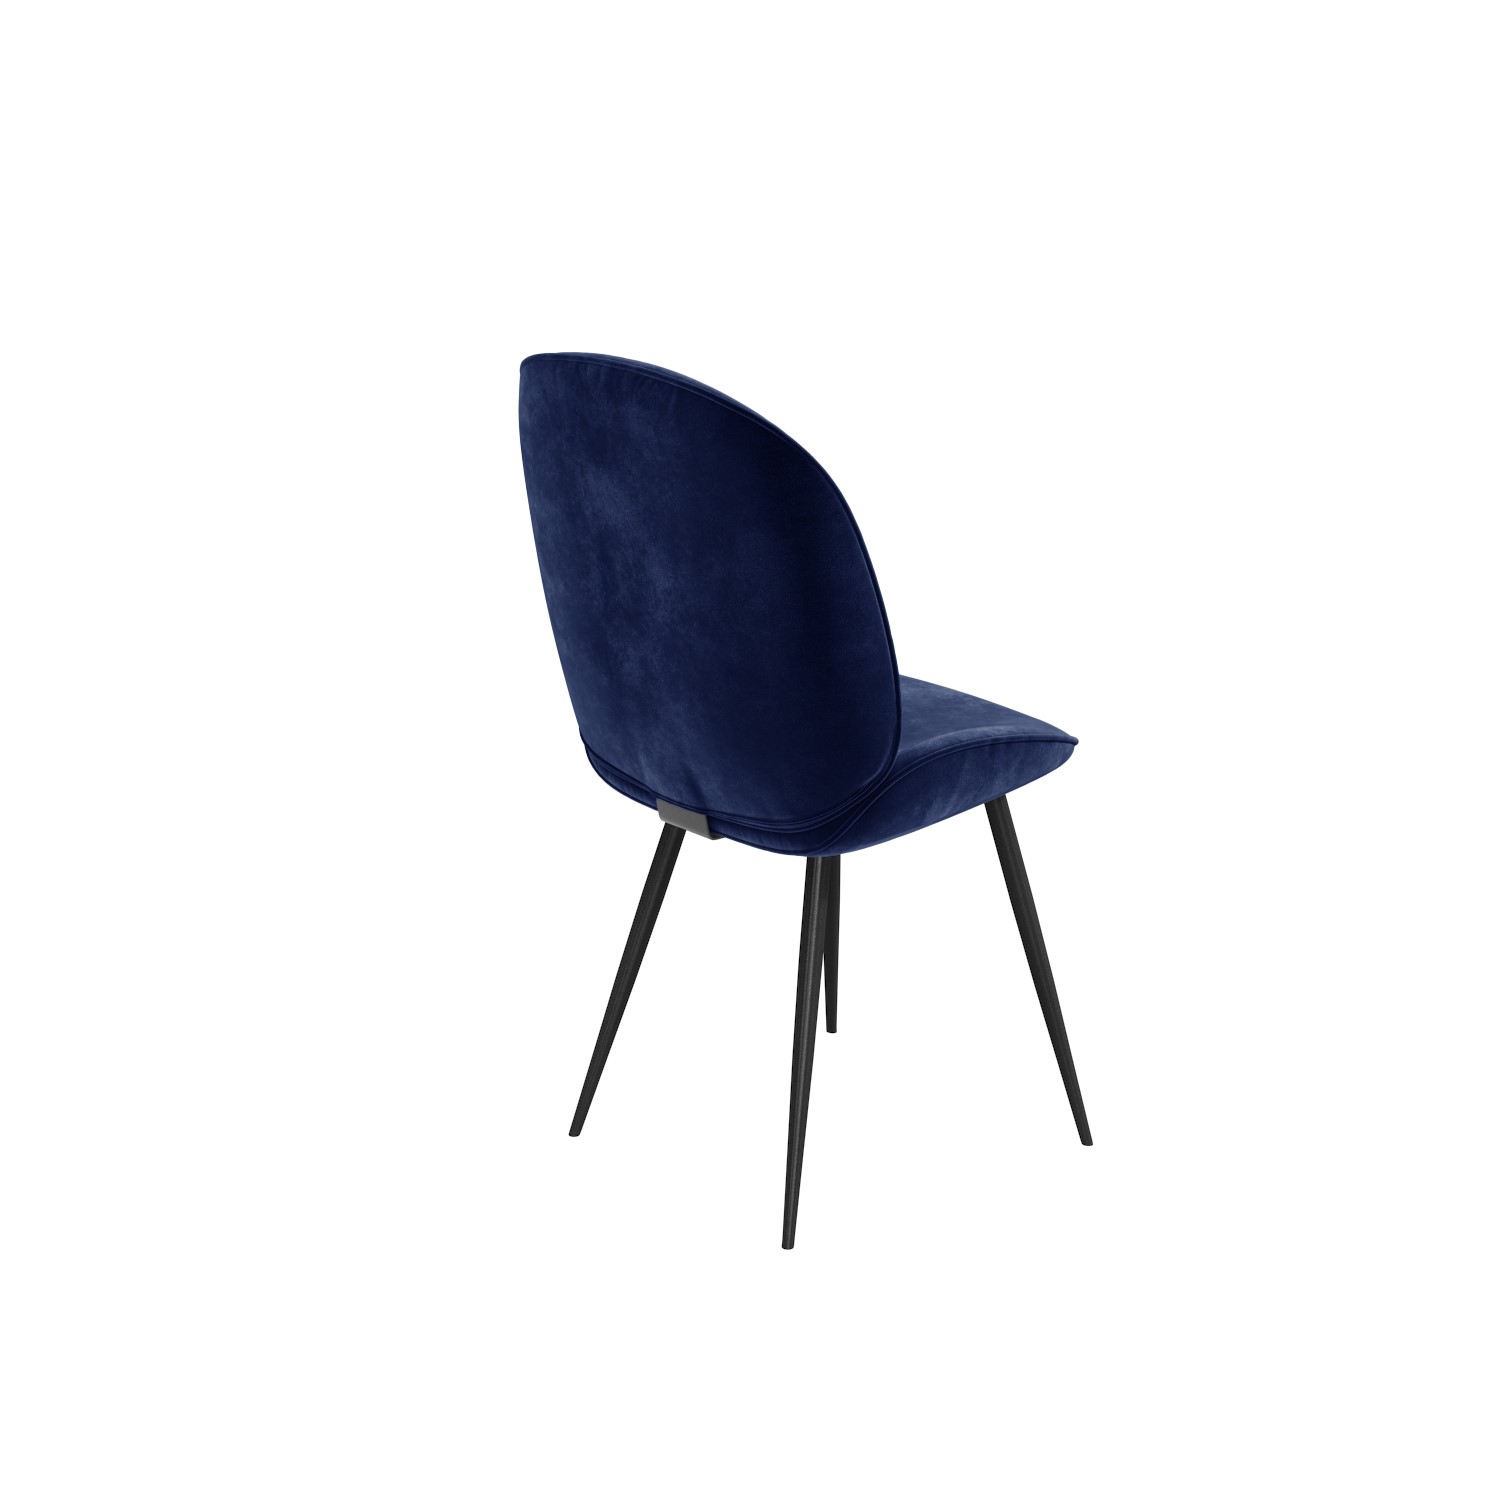 Set Of 4 Navy Blue Velvet Dining Chairs, Navy Blue Dining Chairs Set Of 4